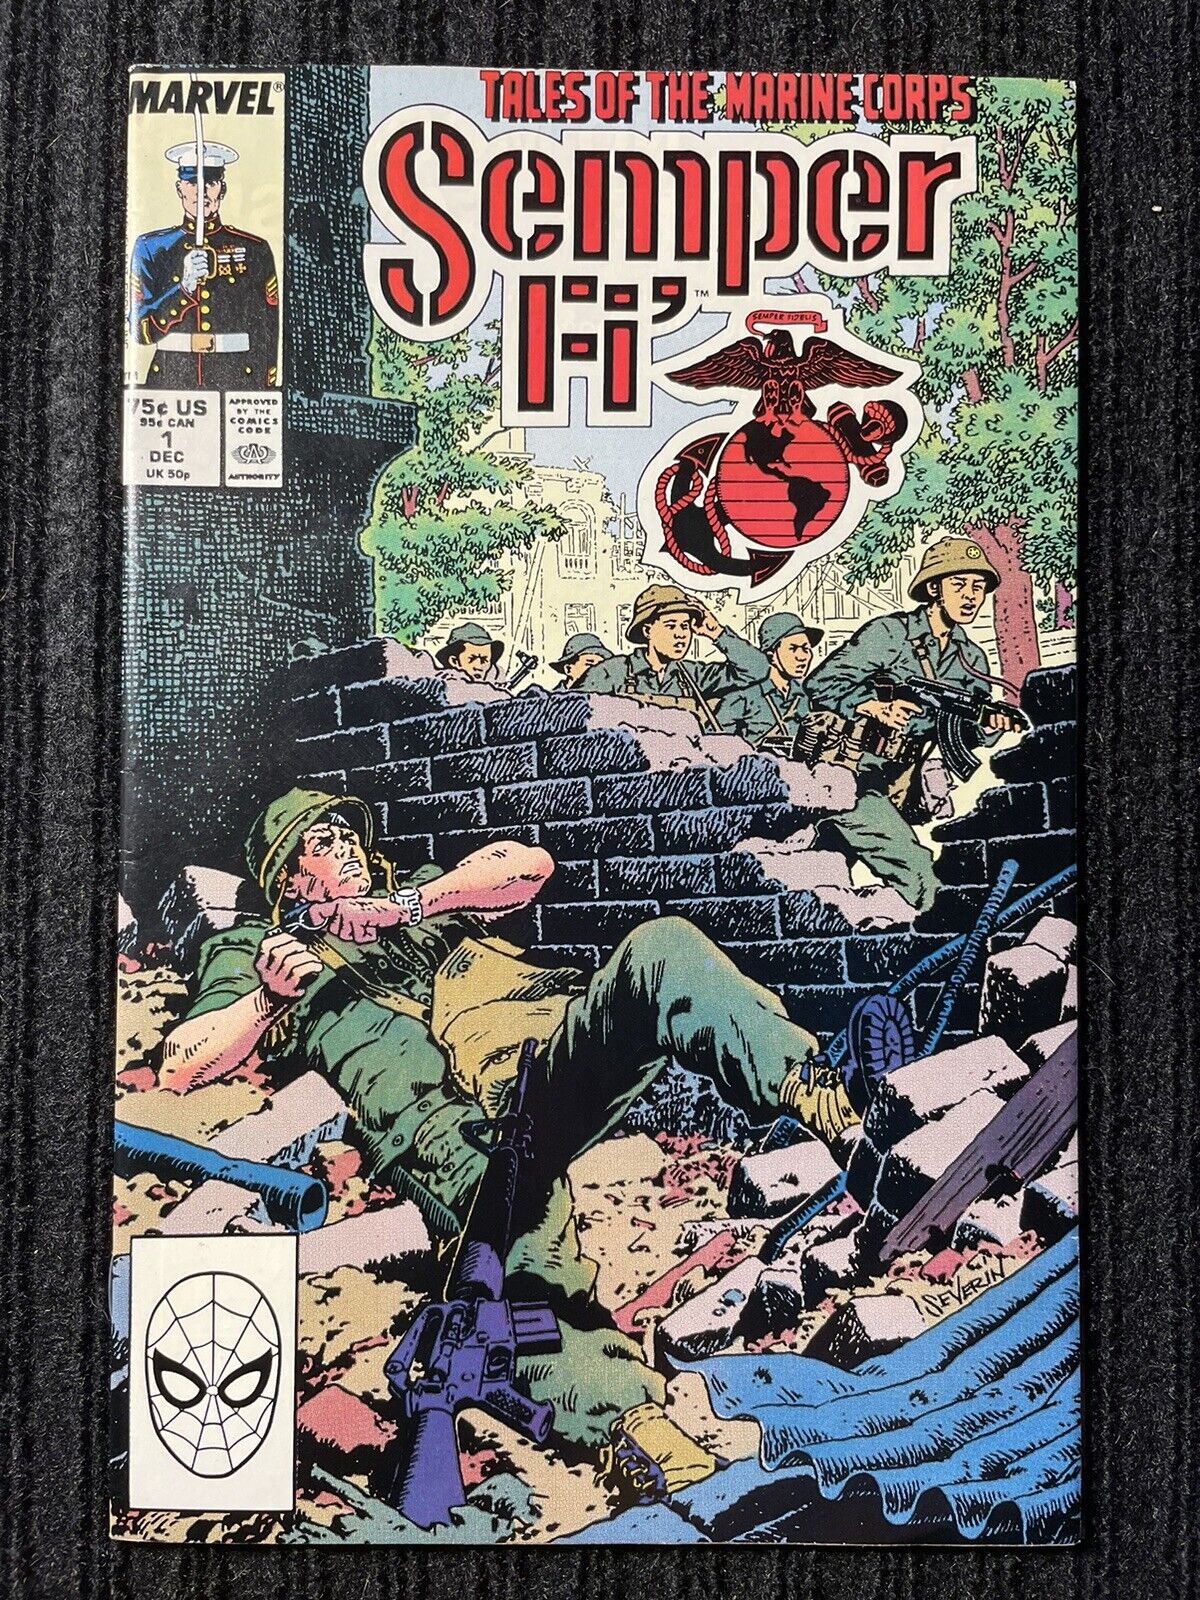 Semper Fi’ #1 Tales Of The Marine Corps. 1988